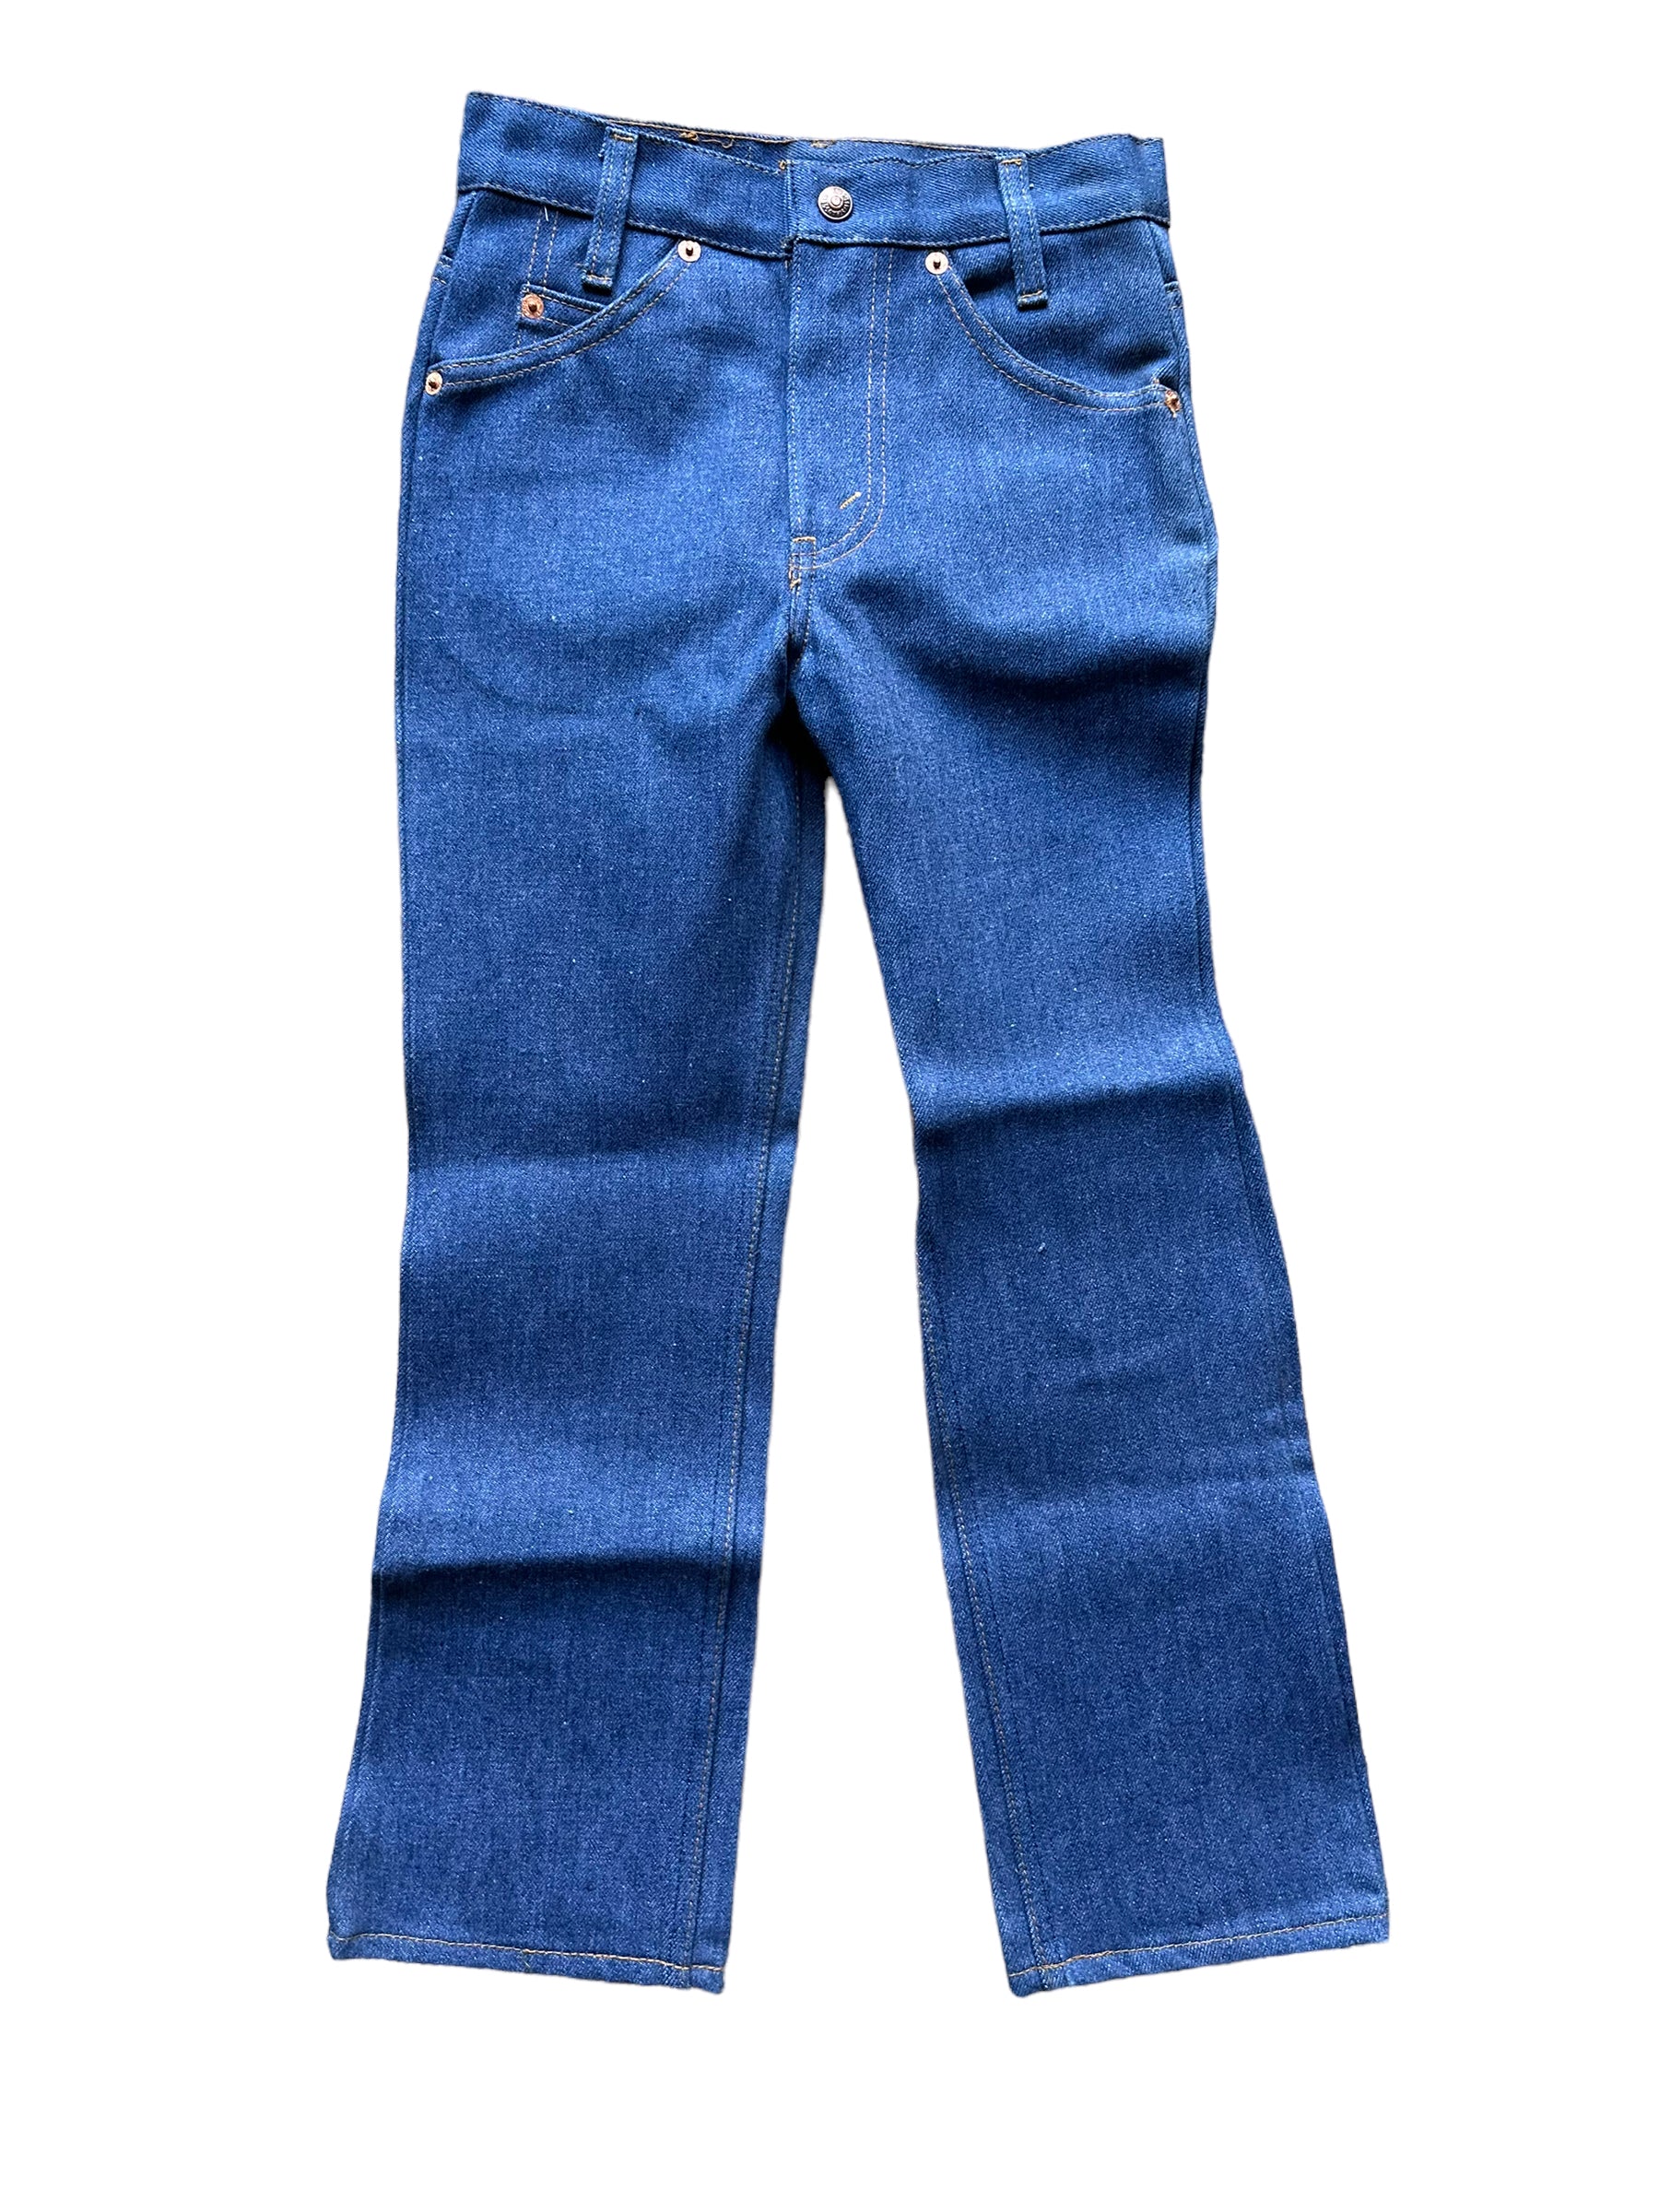 Full front view of Vintage Deadstock Saddleman Boot Cut Jeans 24x23 | Seattle Kid's Vintage | Barn Owl Deadstock Levi's